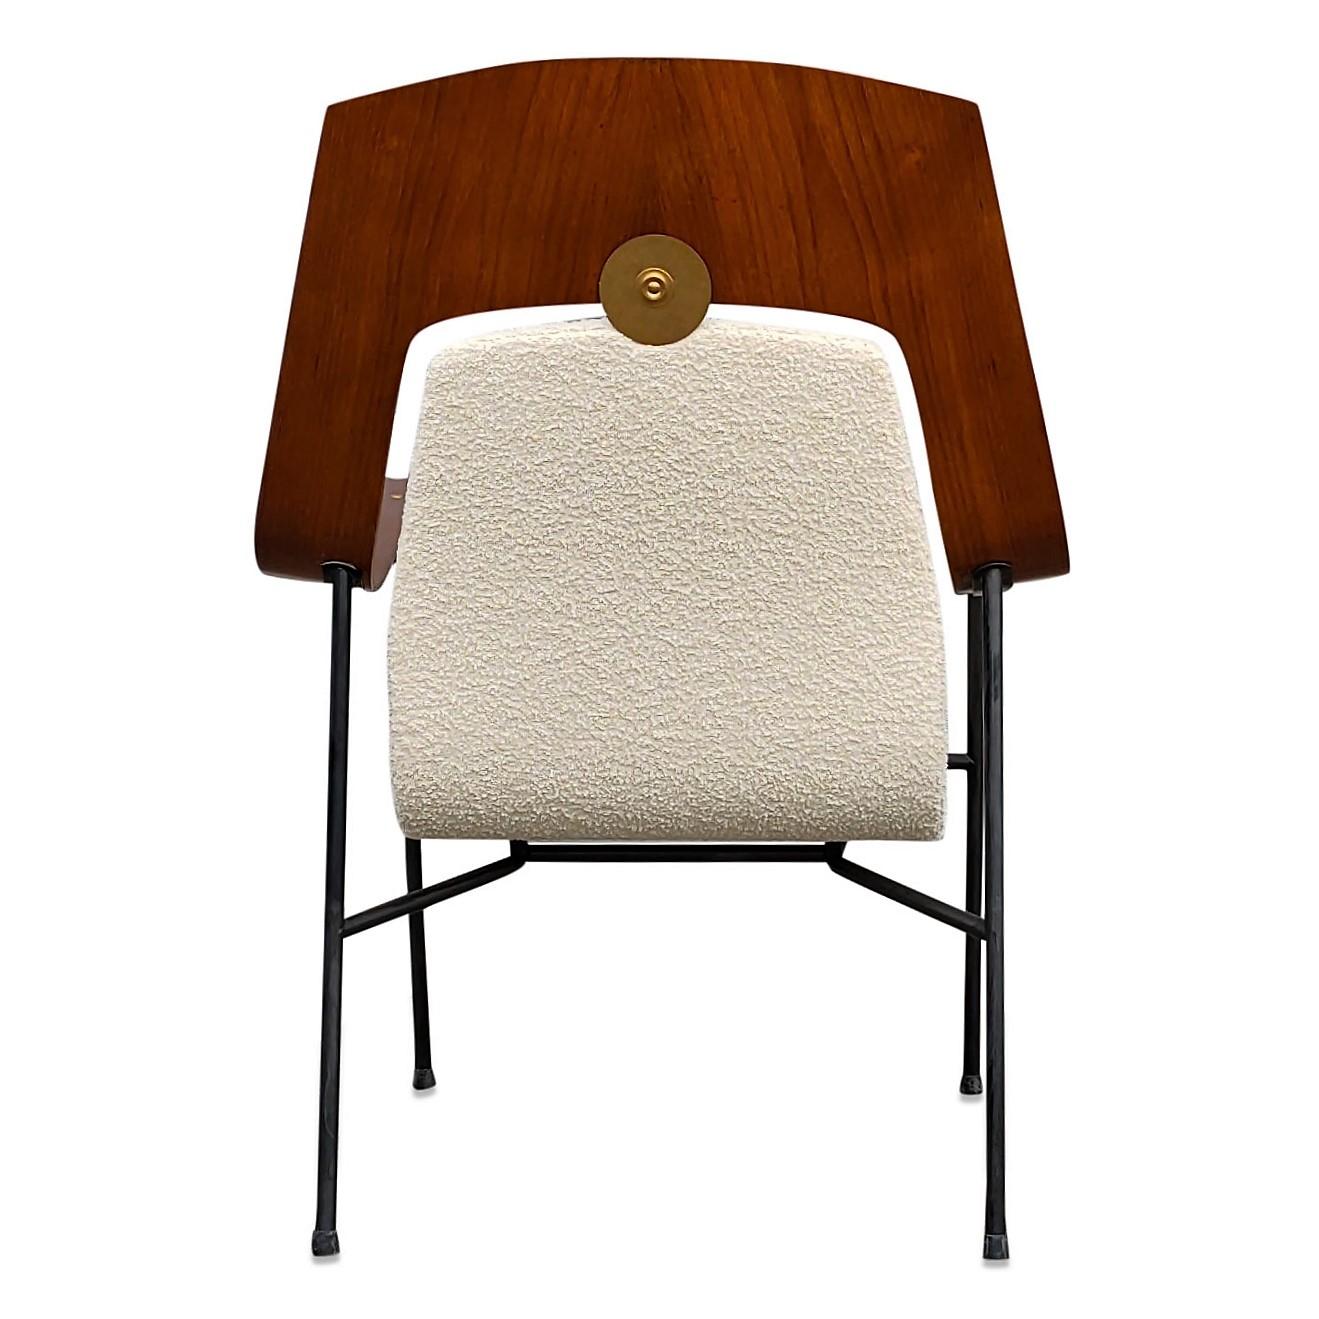 Mid-20th Century Midcentury Plywood and Cream White Armchair Attributed Robin Day, UK, 1960s For Sale